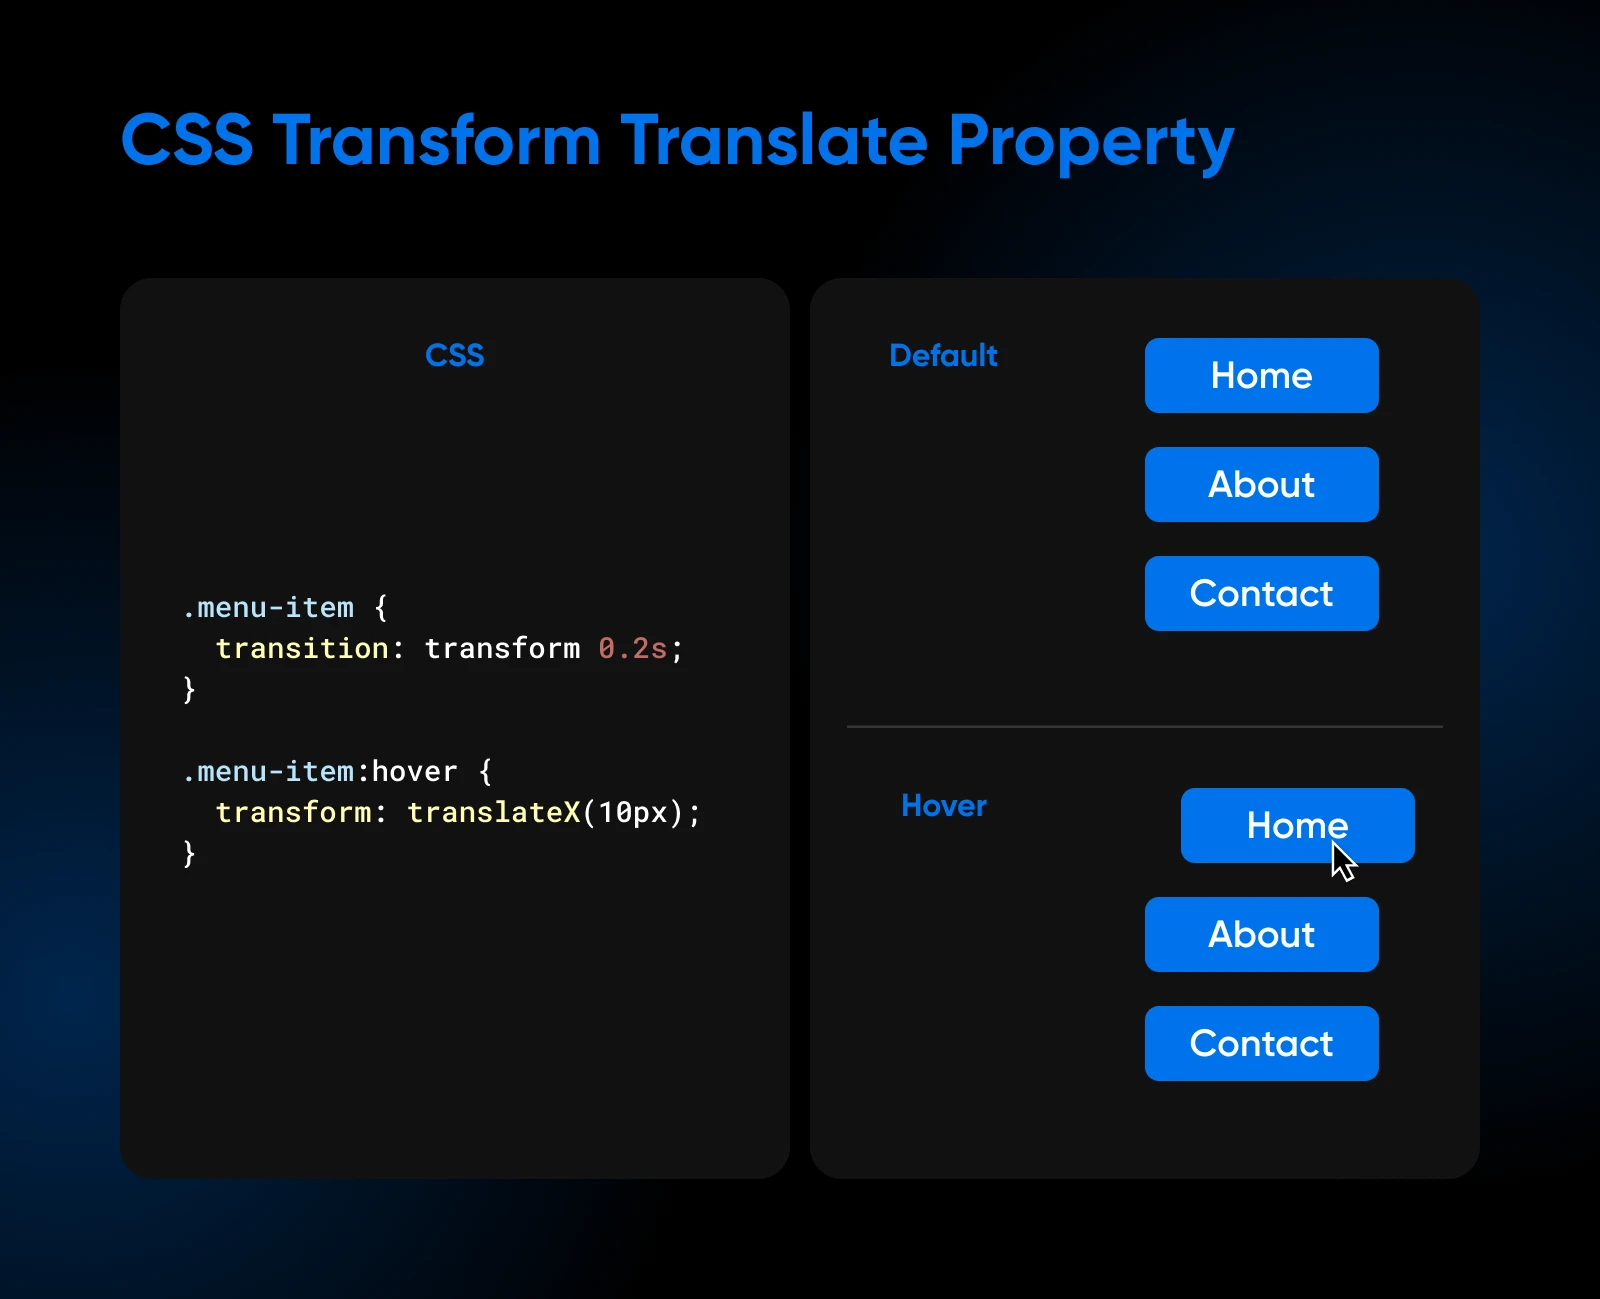 CSS code for translating the property on the left, and the default vs. hover designs for the buttons on the right. 